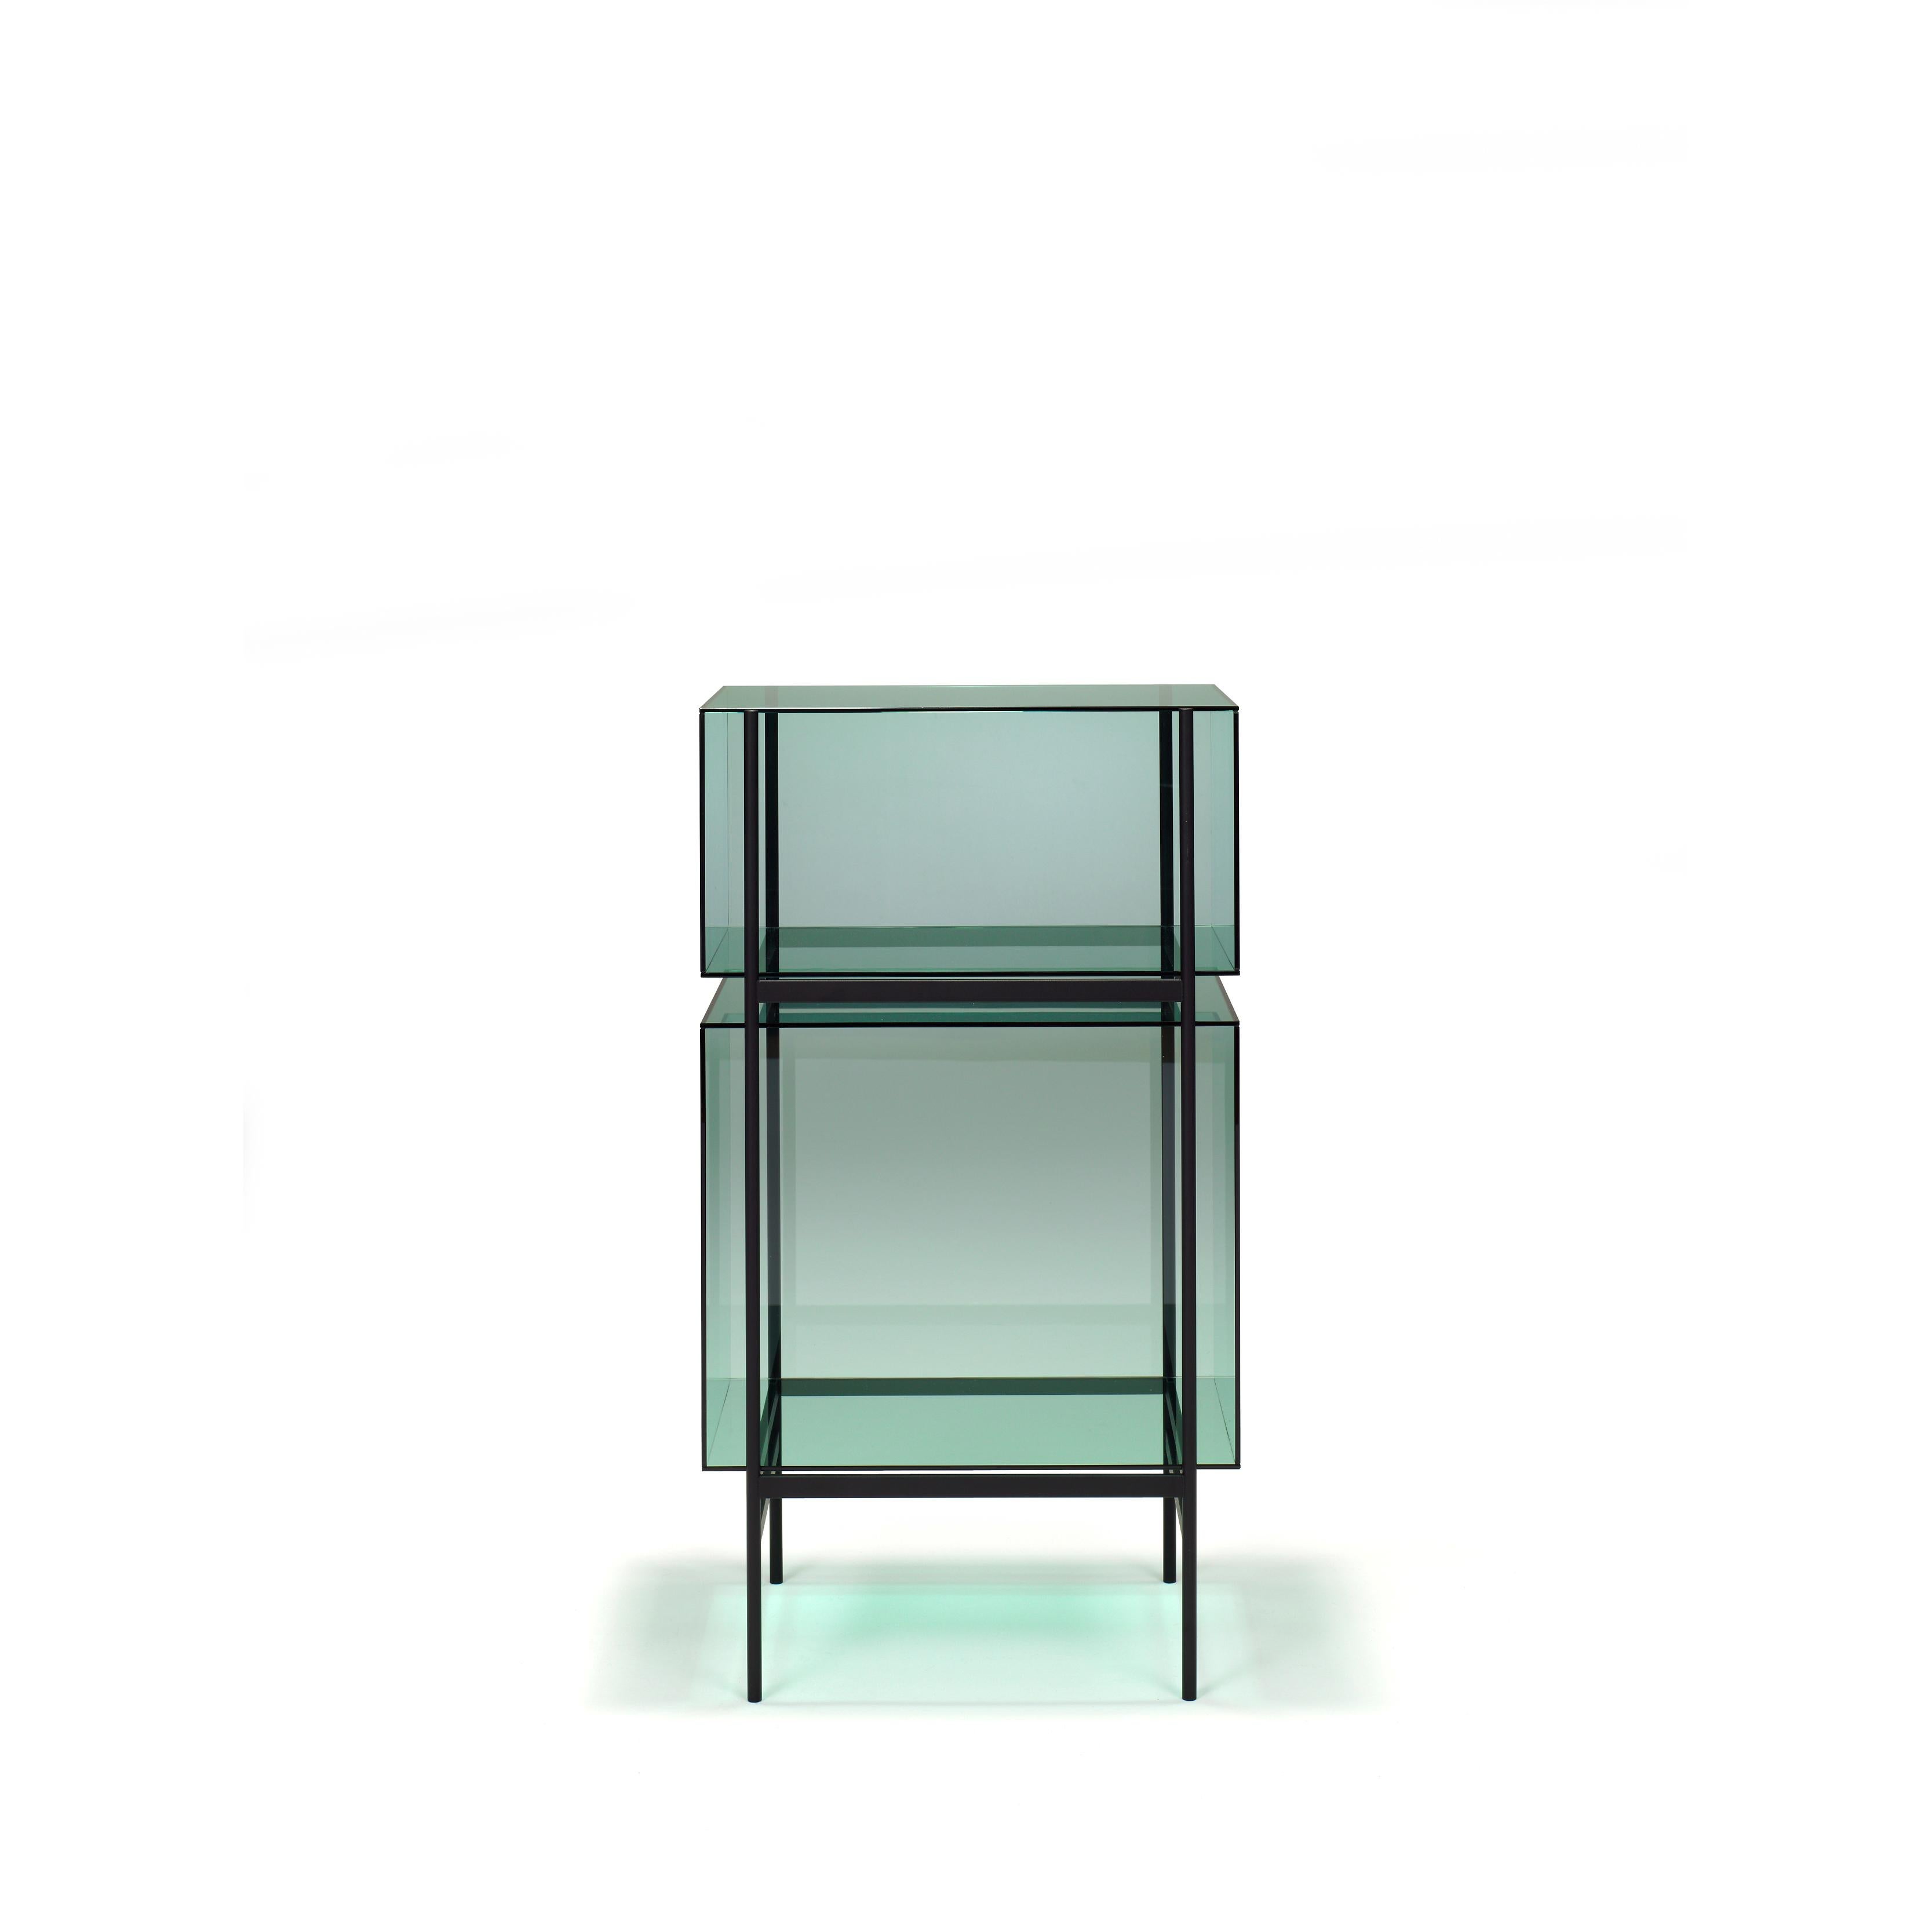 German Lyn Small Blue Black Cabinet by Pulpo